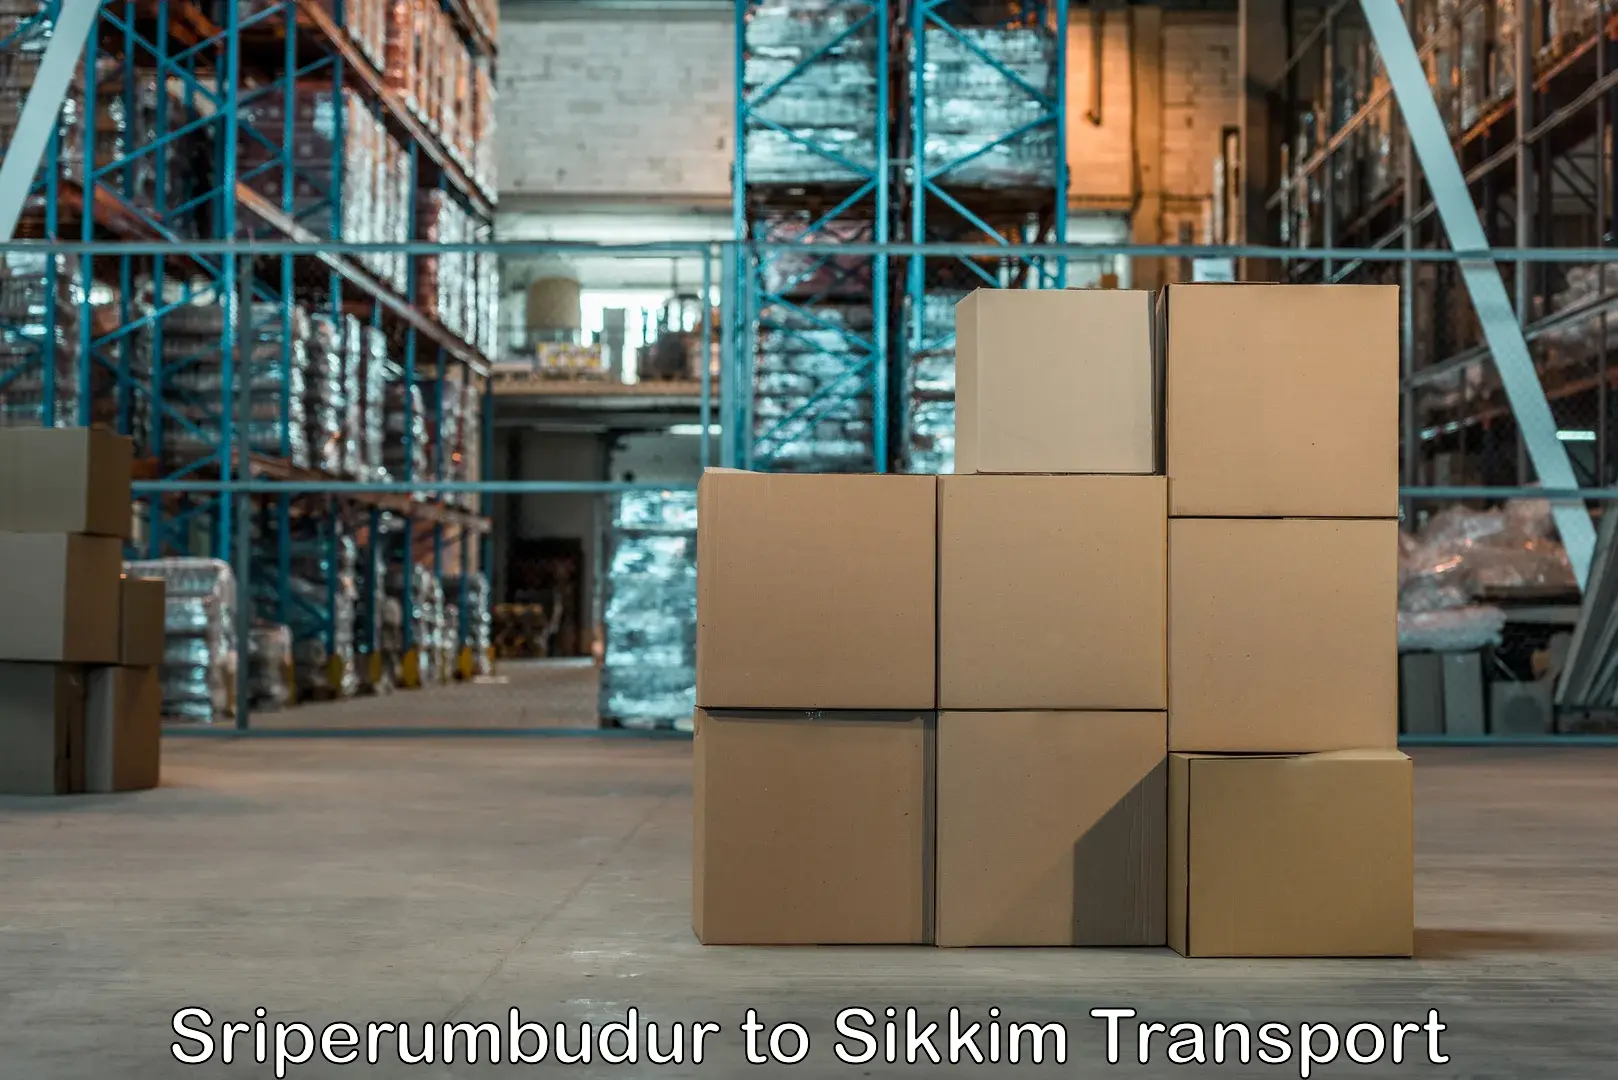 Goods delivery service Sriperumbudur to Pelling